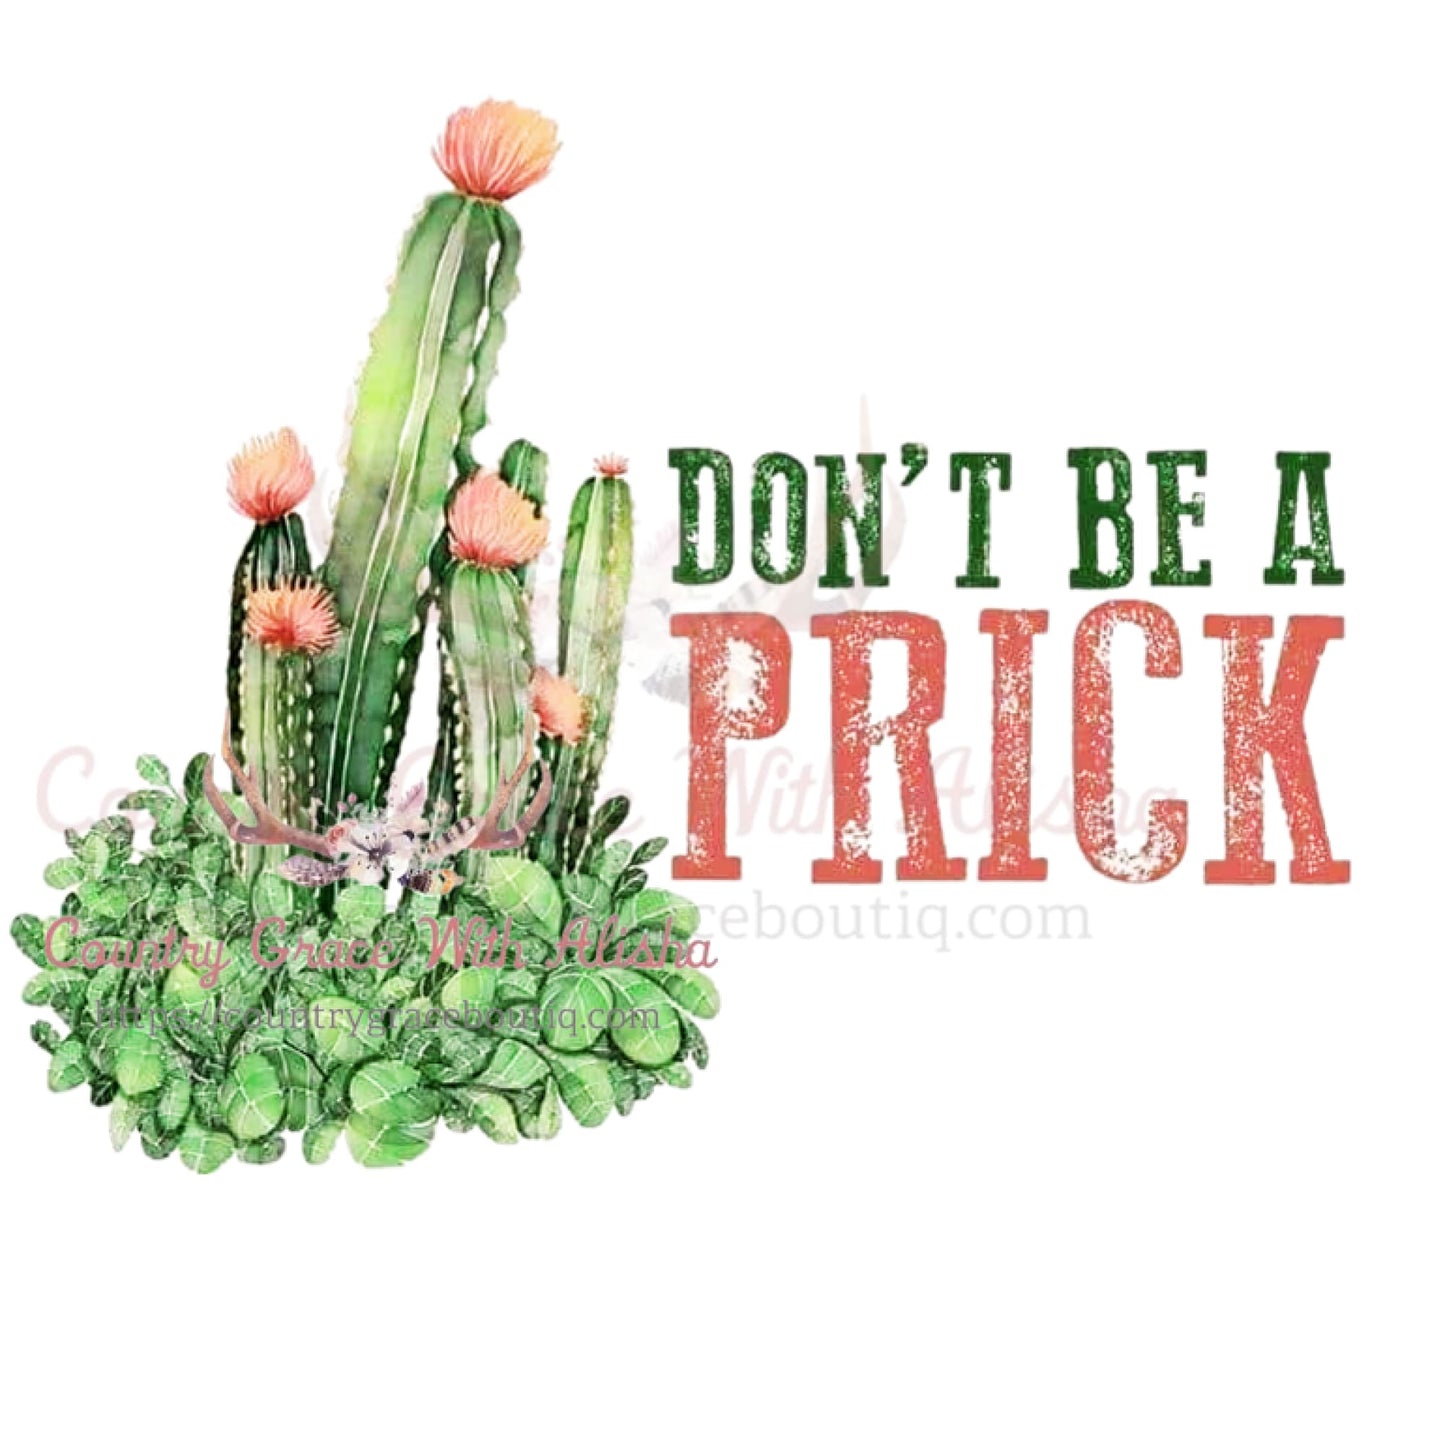 Dont Be A Prick Cactus Sublimation Transfer - Sub $1.50 